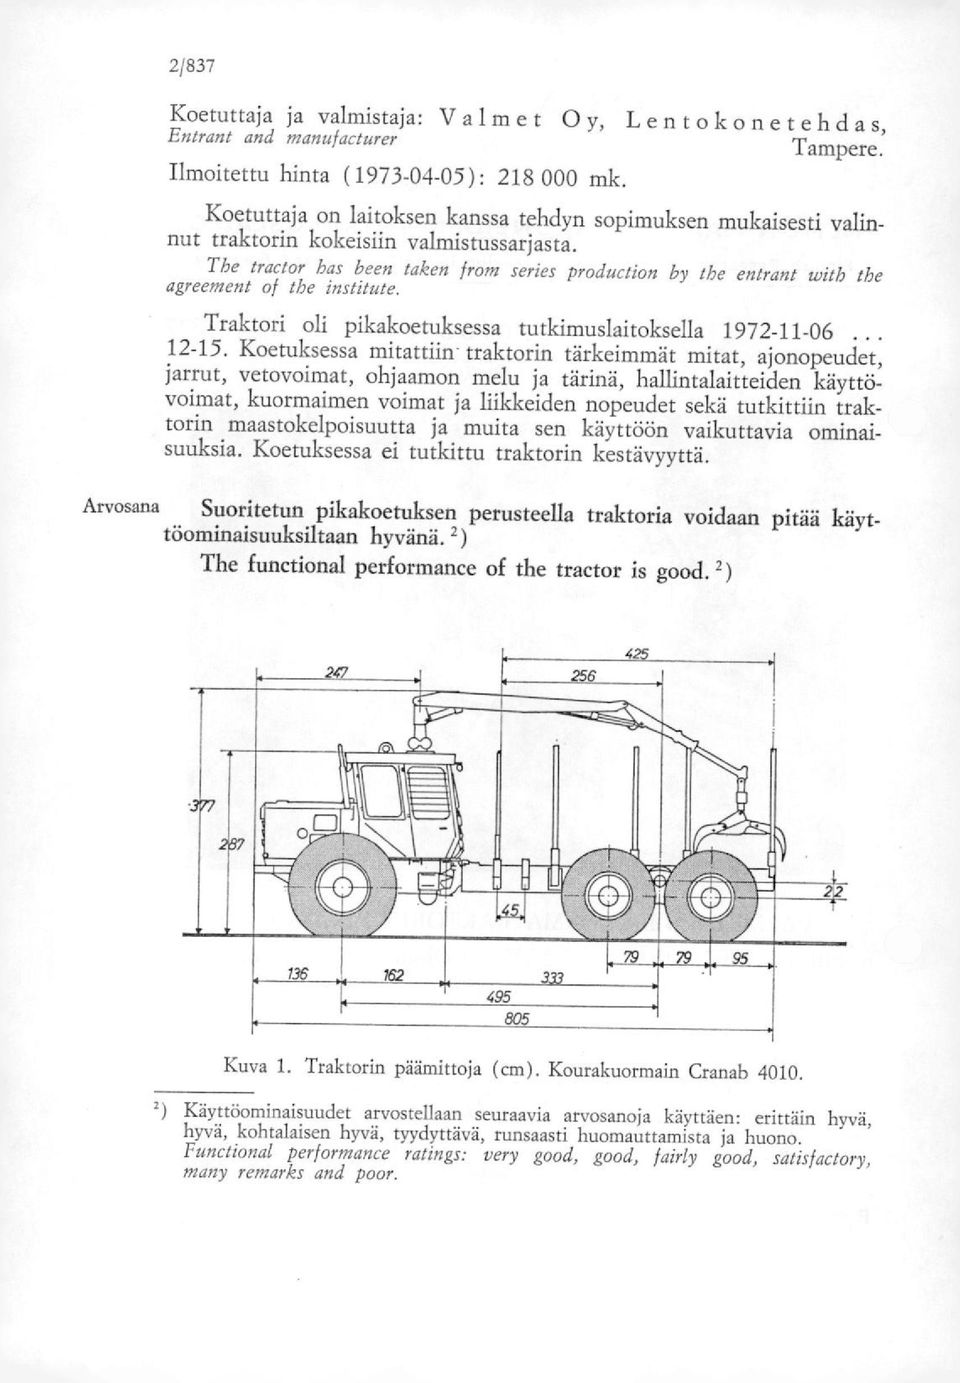 The tractor has been taken from series production by the entrant with the agreement of the institute. Traktori oli pikakoetuksessa tutkimuslaitoksella 1972-11-06... 12-15.